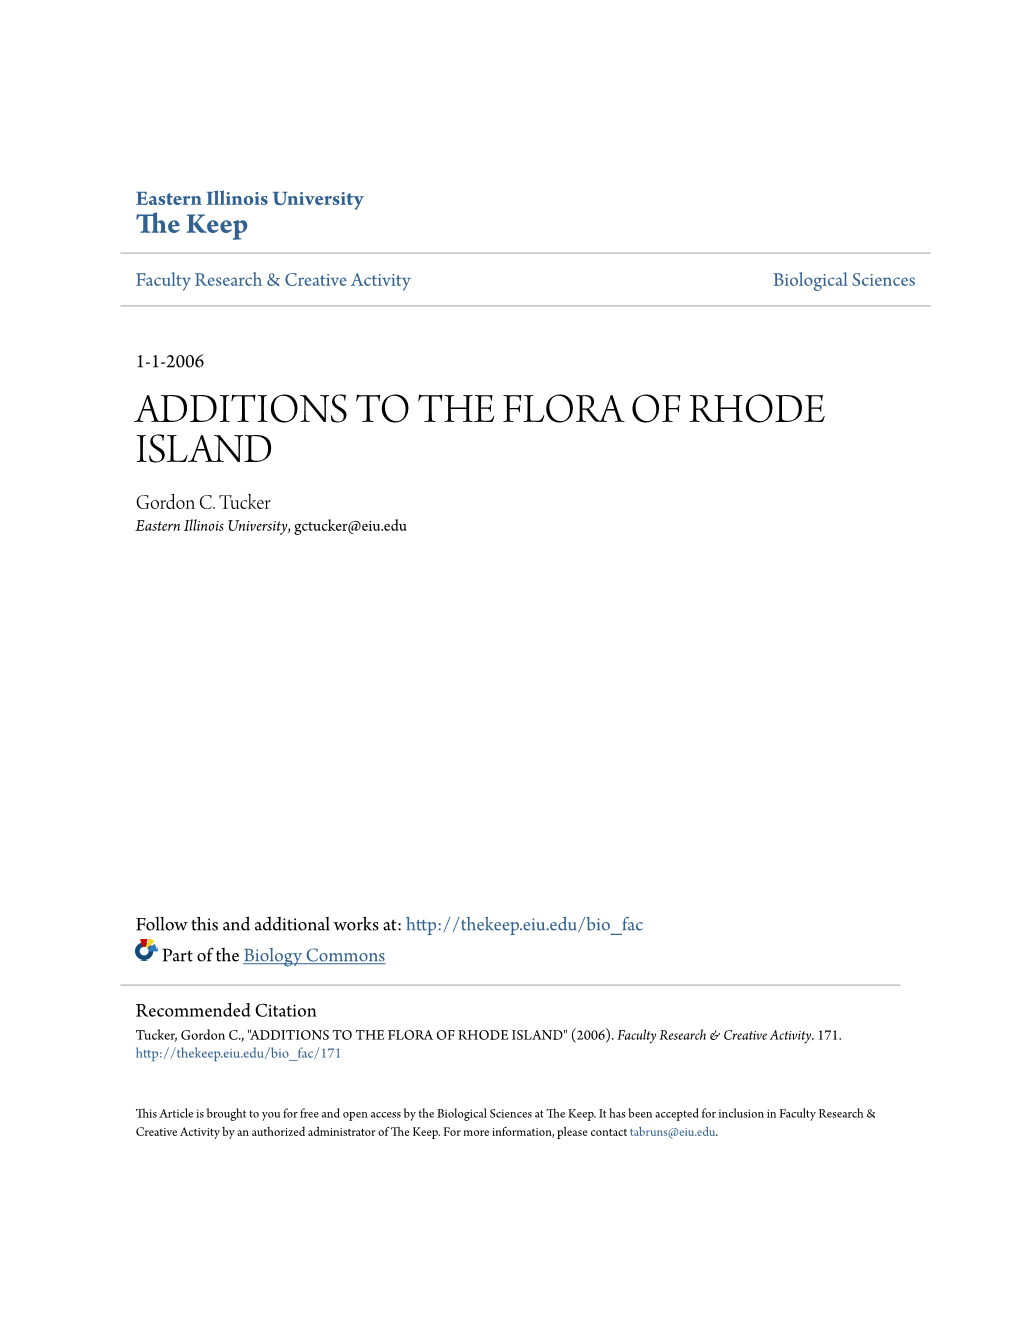 ADDITIONS to the FLORA of RHODE ISLAND Gordon C